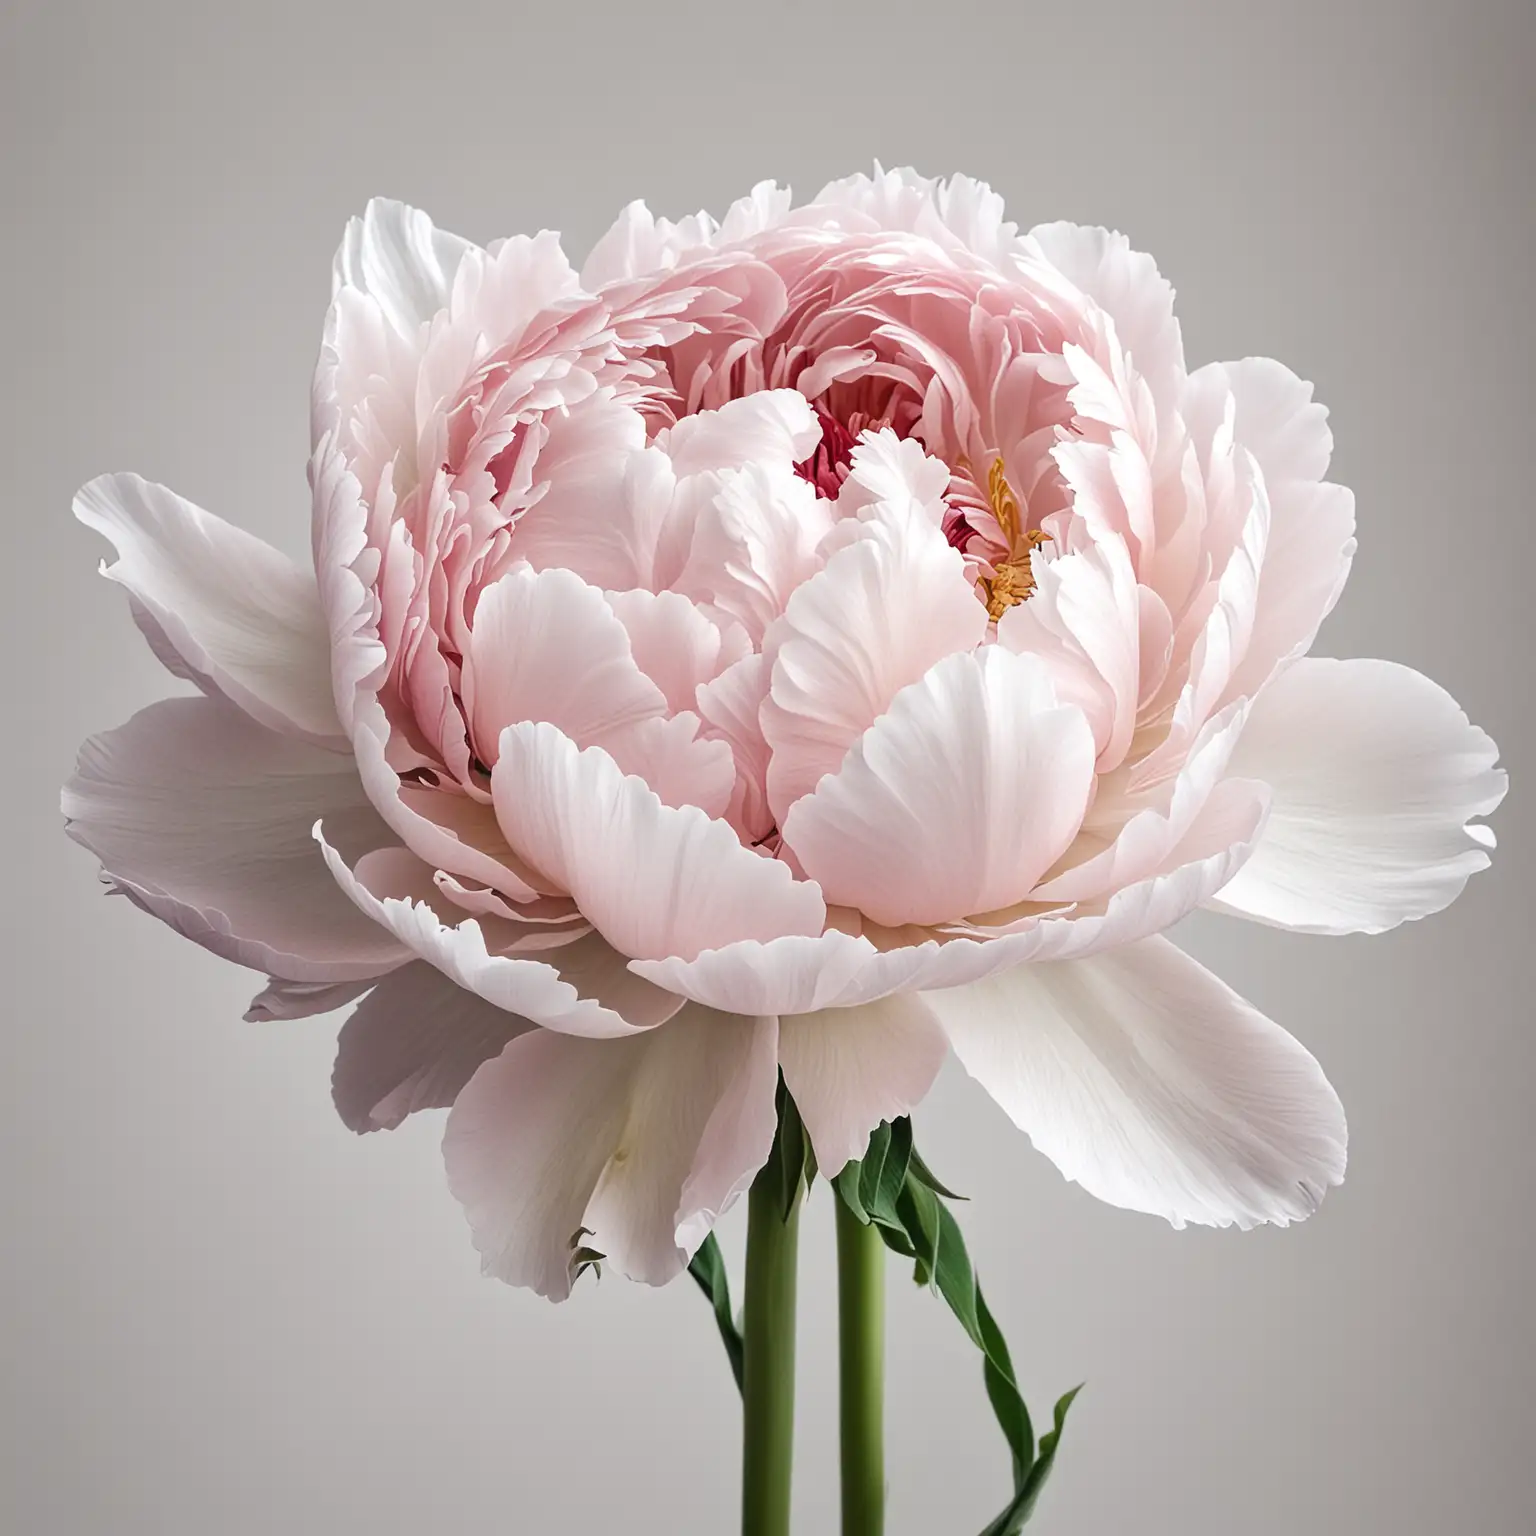 Realistic single cream and very pale pink peonie on a solid white background in a moody tone